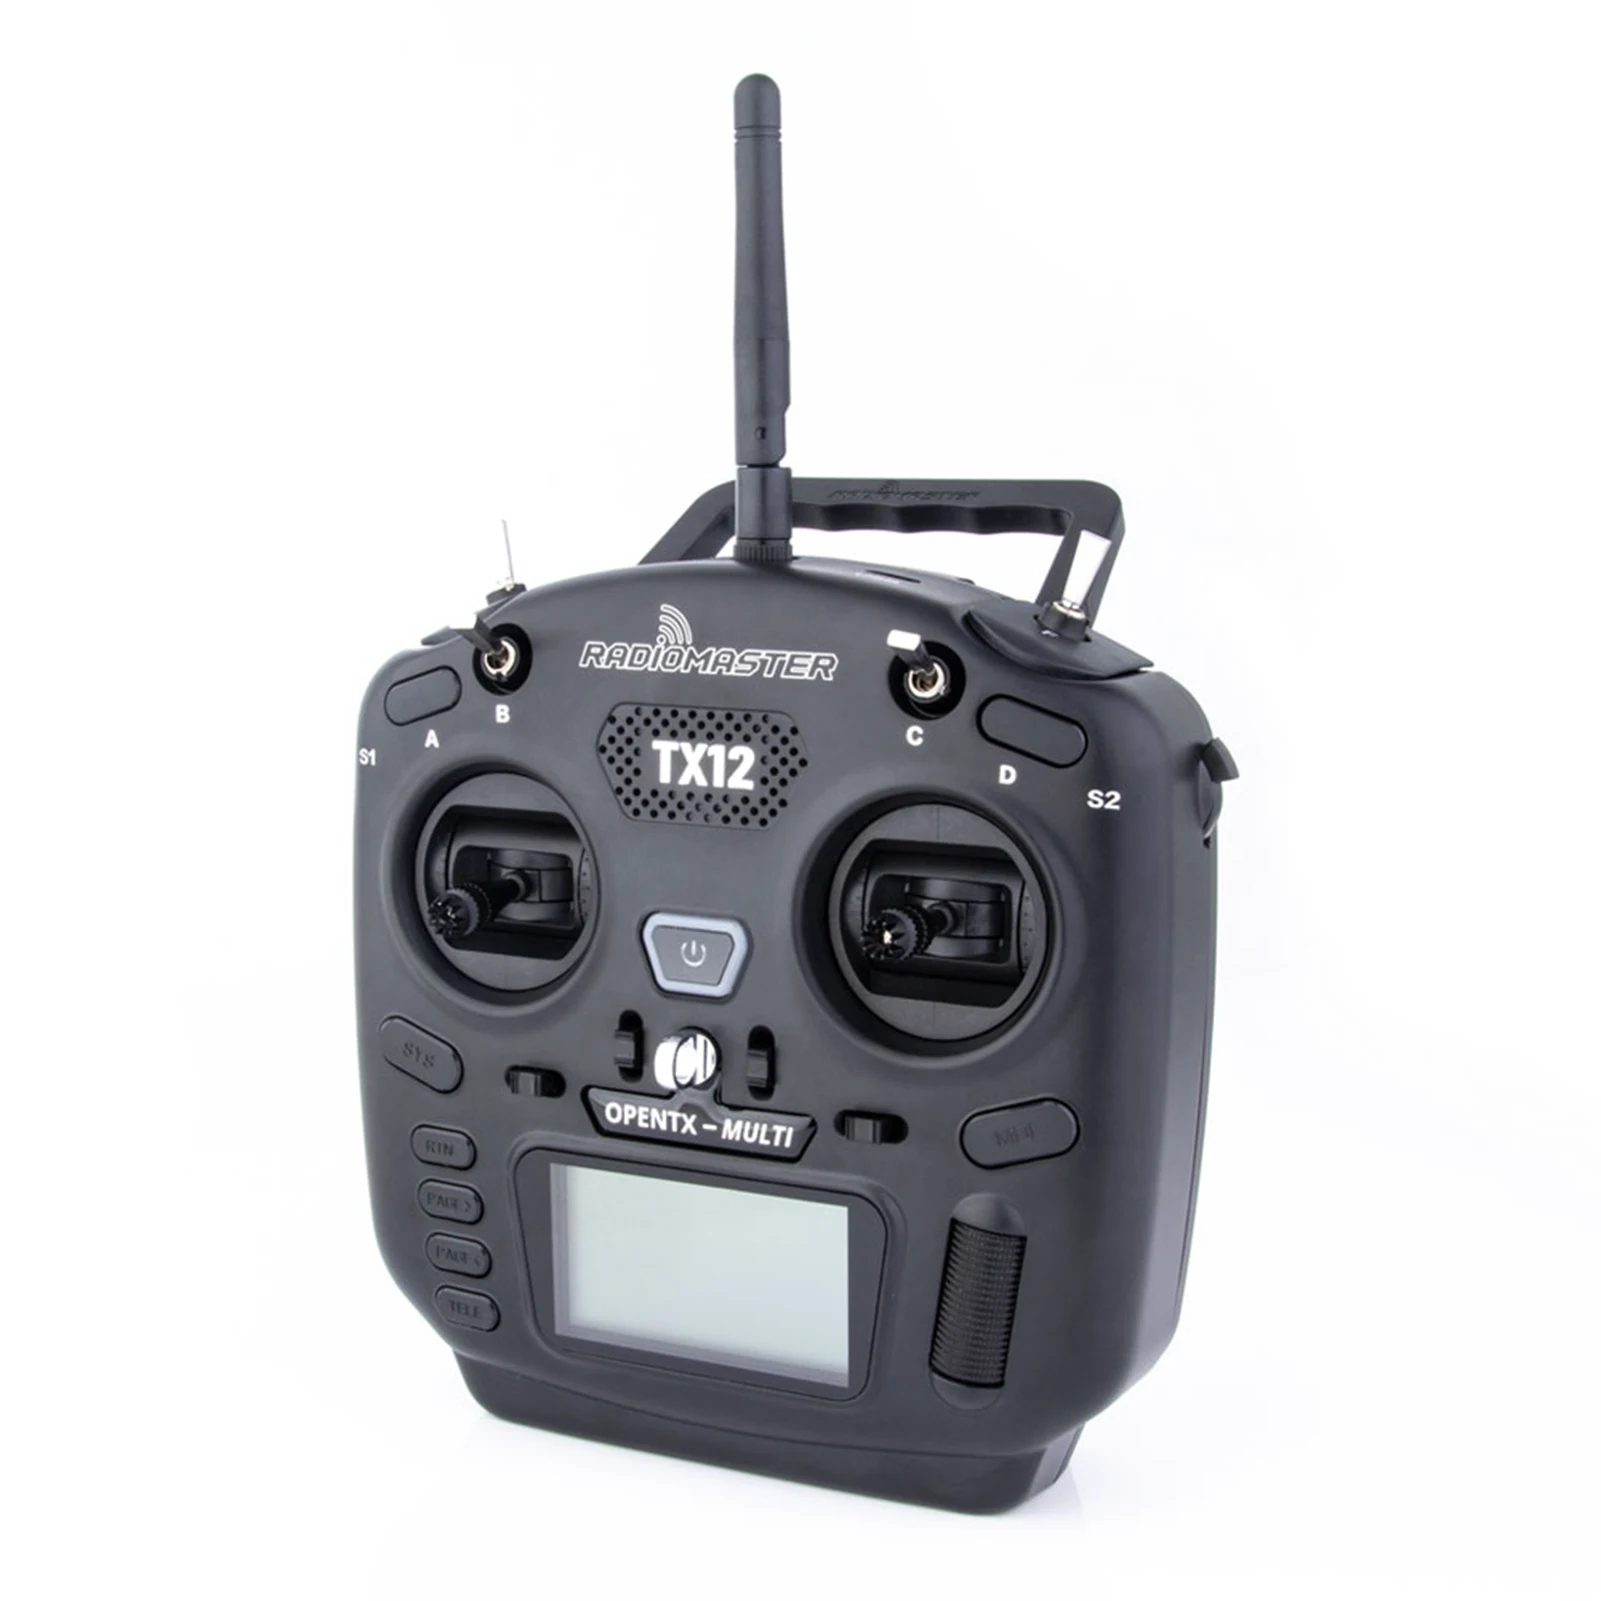 

RadioMaster TX12 16CH OpenTX Remote Control Transmitter Hitec Futaba Frsky For Fixed-wing Glider Helicopter Multi-rotor Aircraft